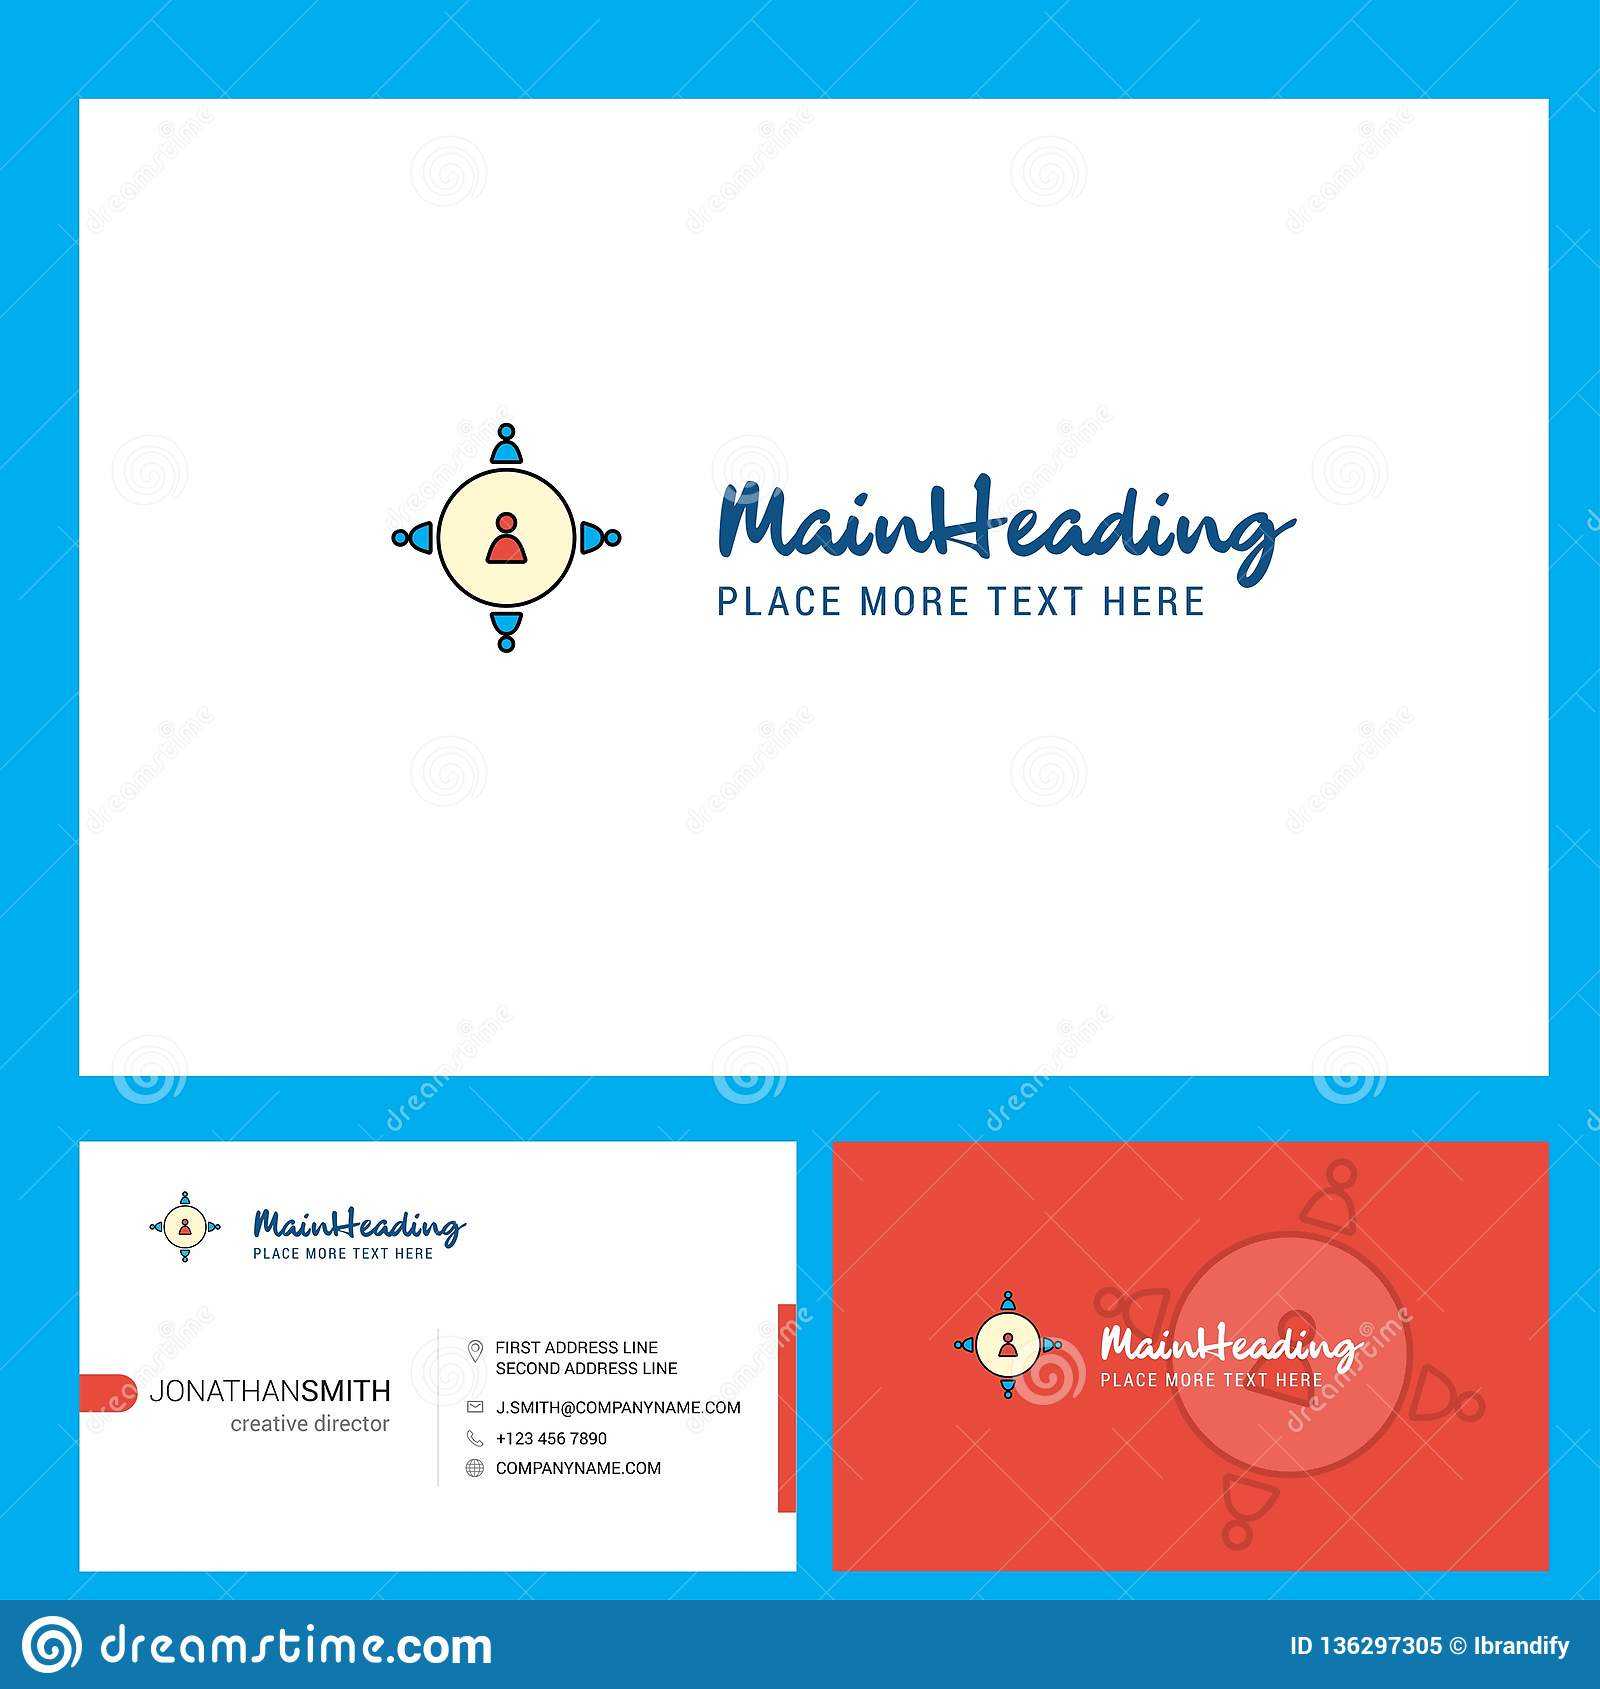 Networking Logo Design With Tagline & Front And Back Within Networking Card Template